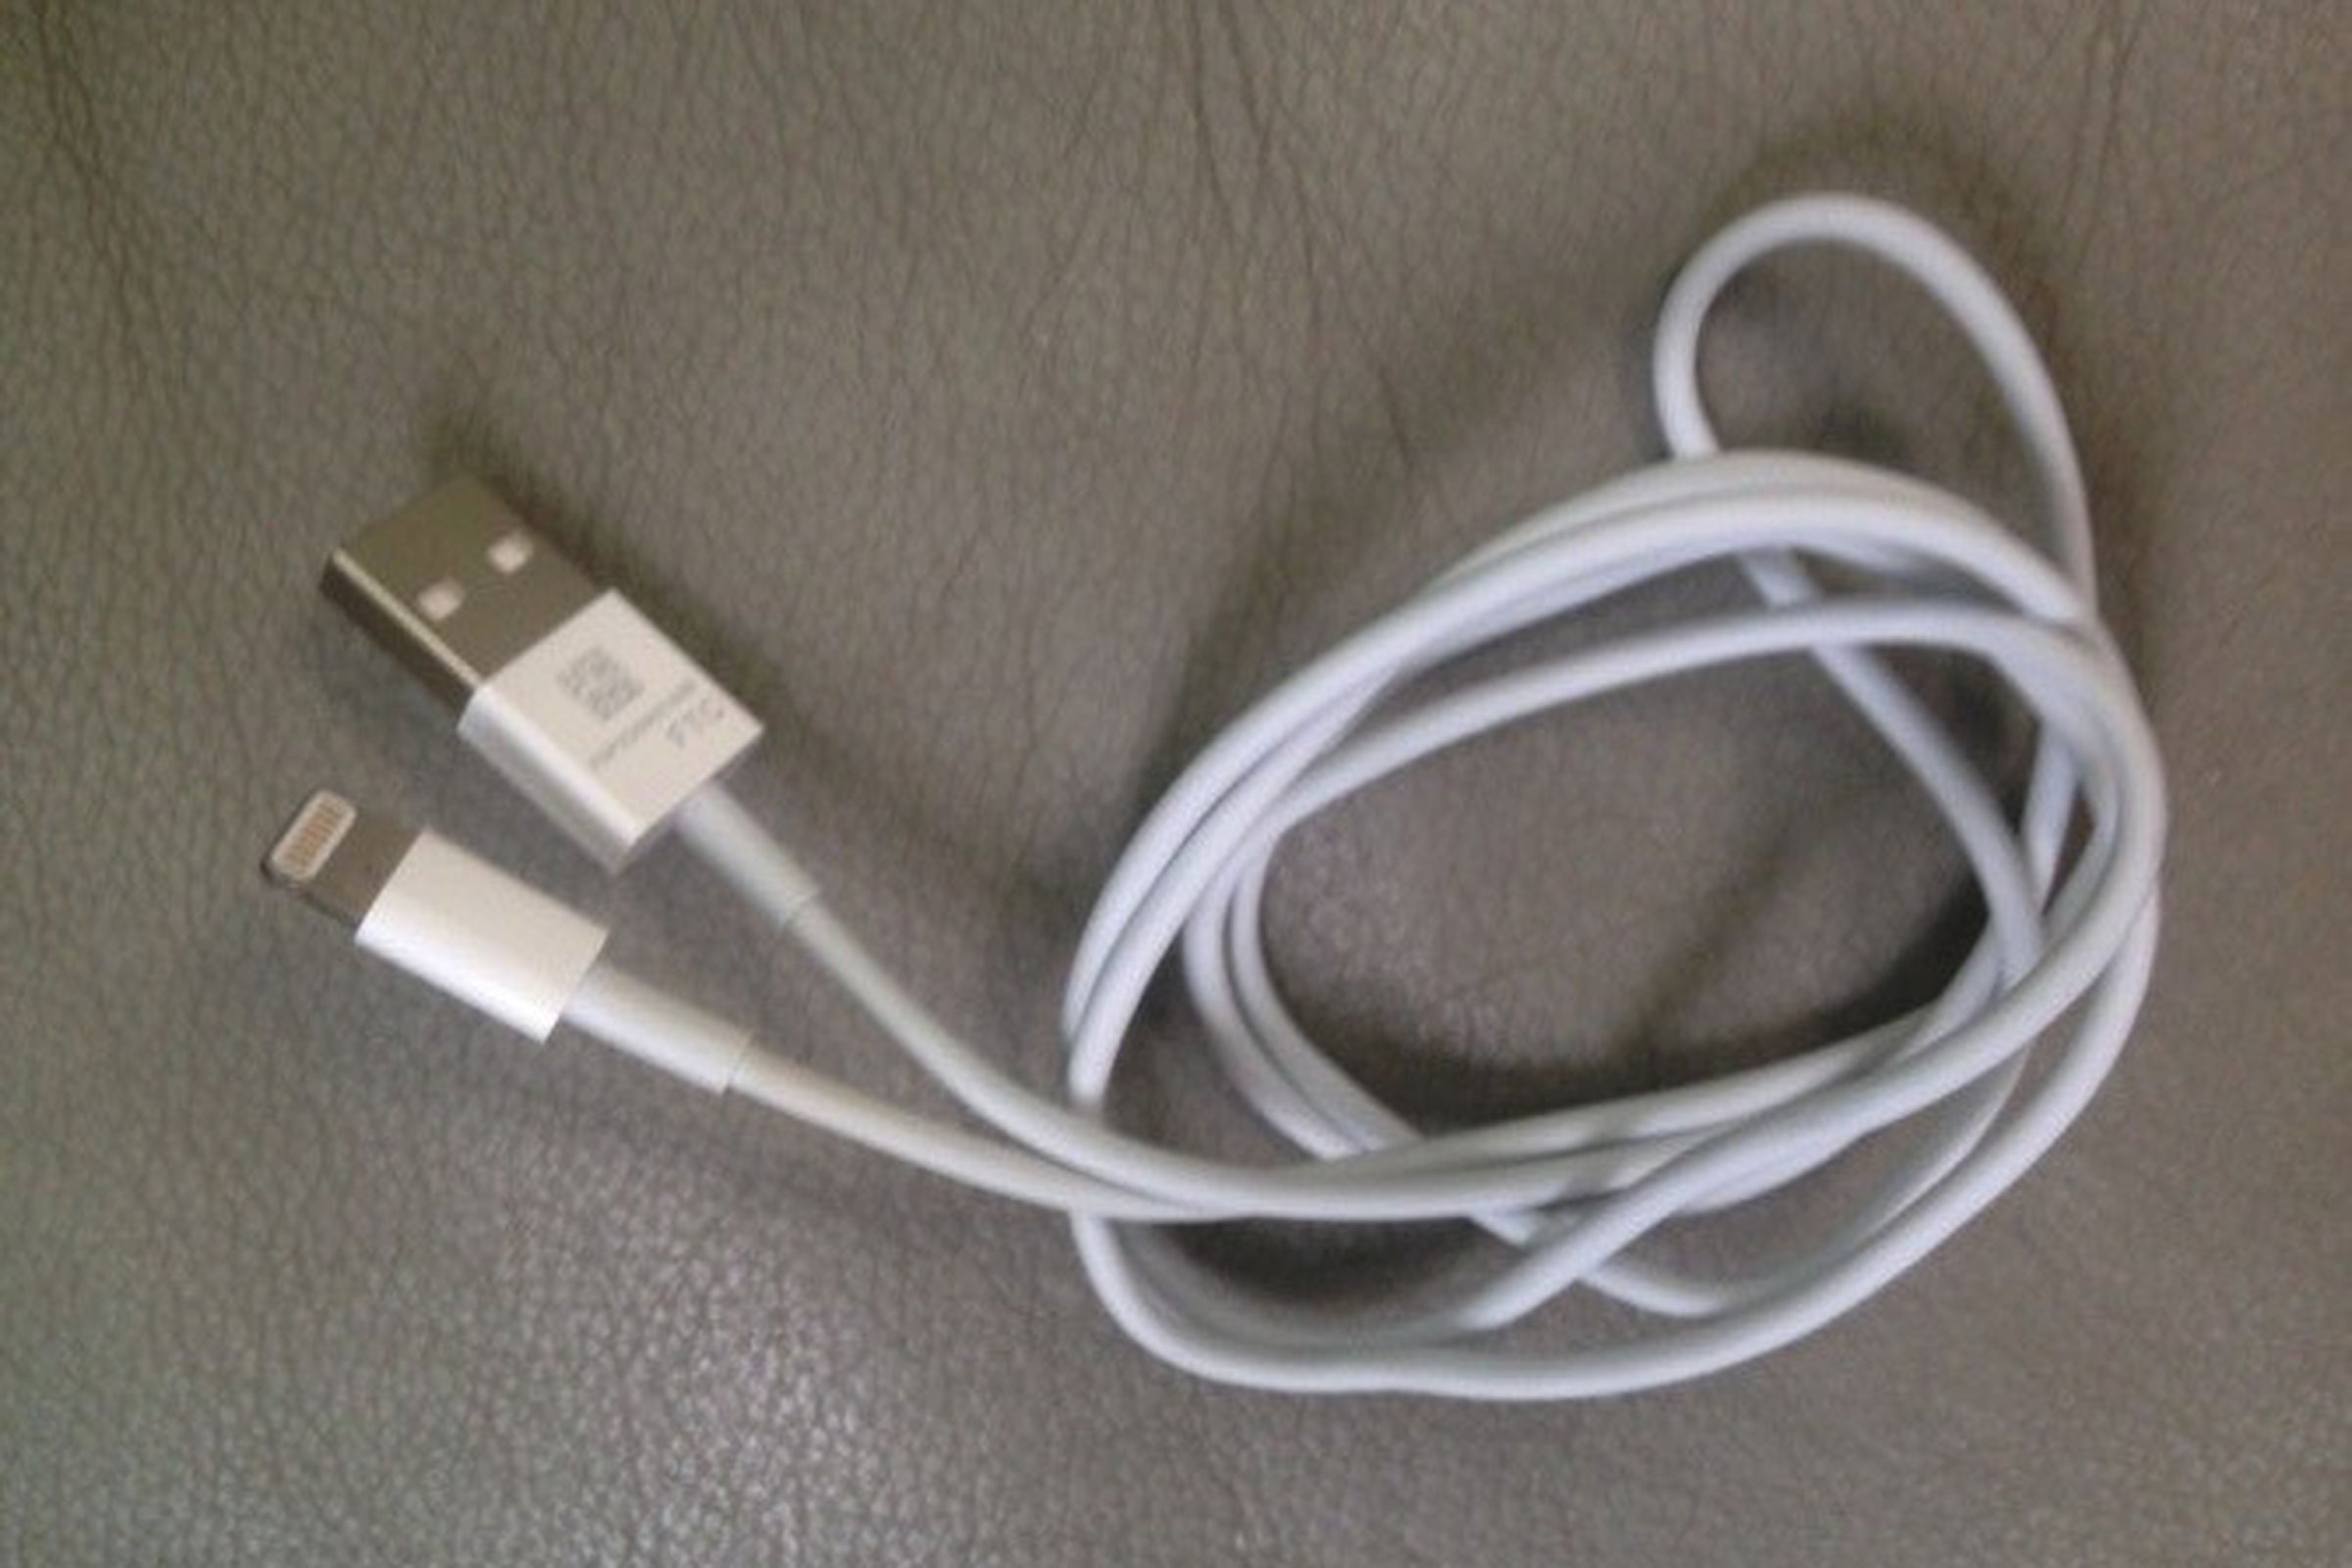 iphone dock connector USB cable (veister)